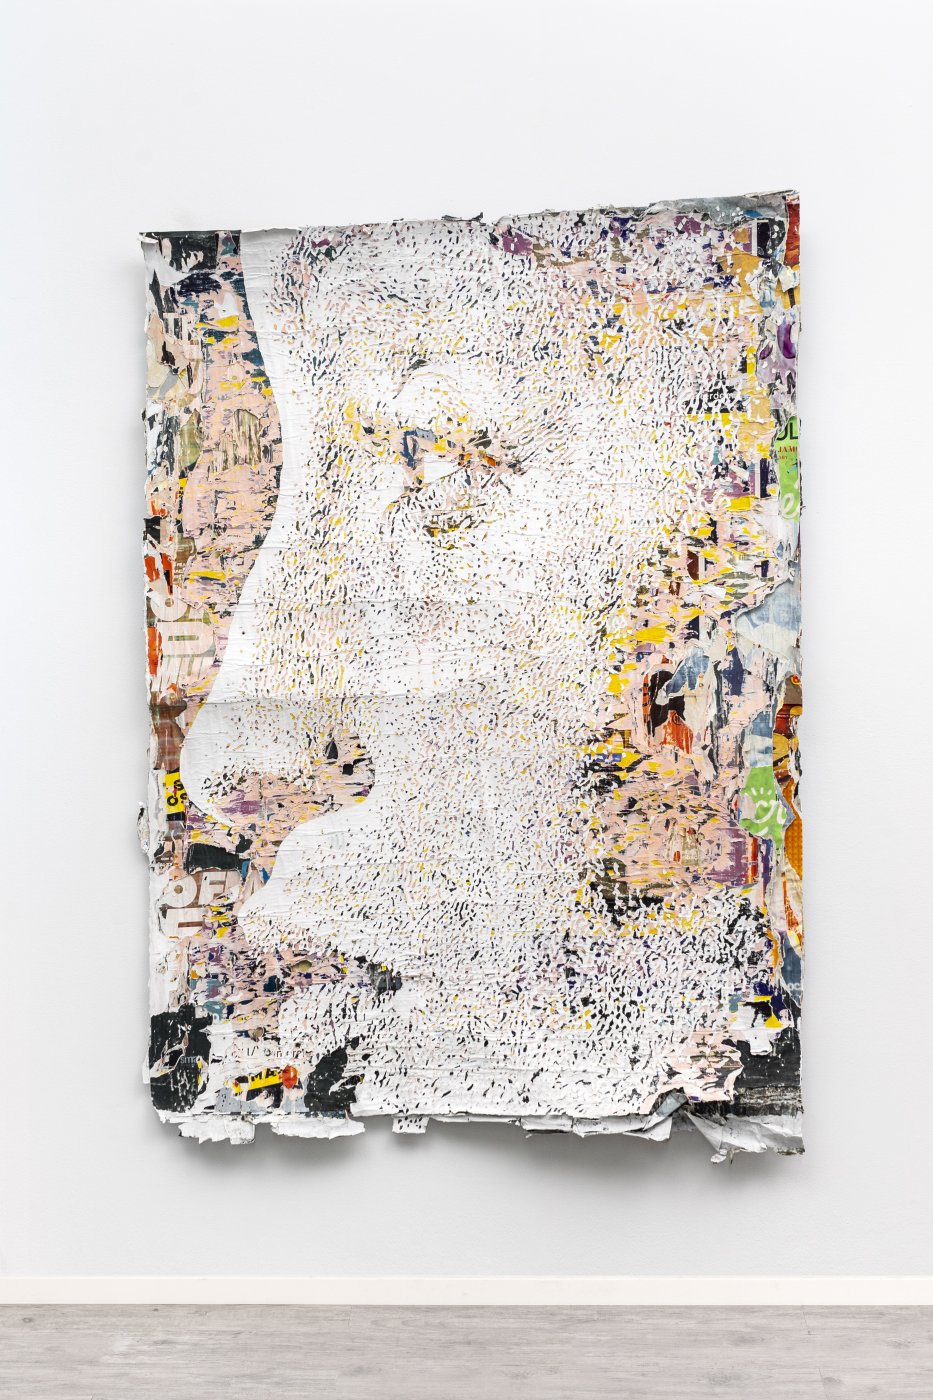 Alexandre Farto aka Vhils, Beam Series #18, 2021. Hand-carved advertising posters. 187 x 131 cm. Unique
